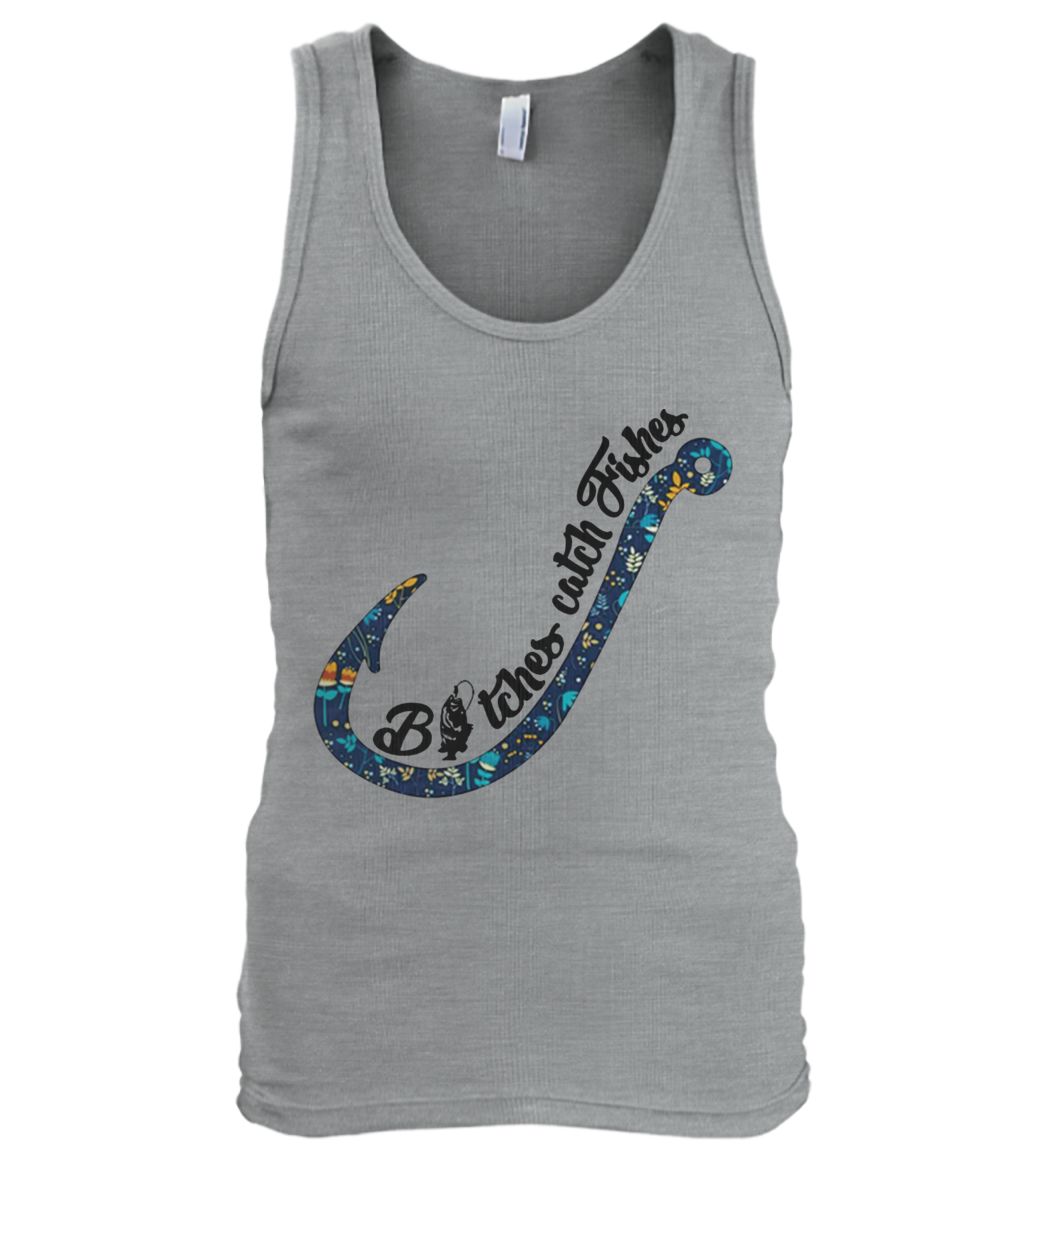 Bitches catch fishes men's tank top